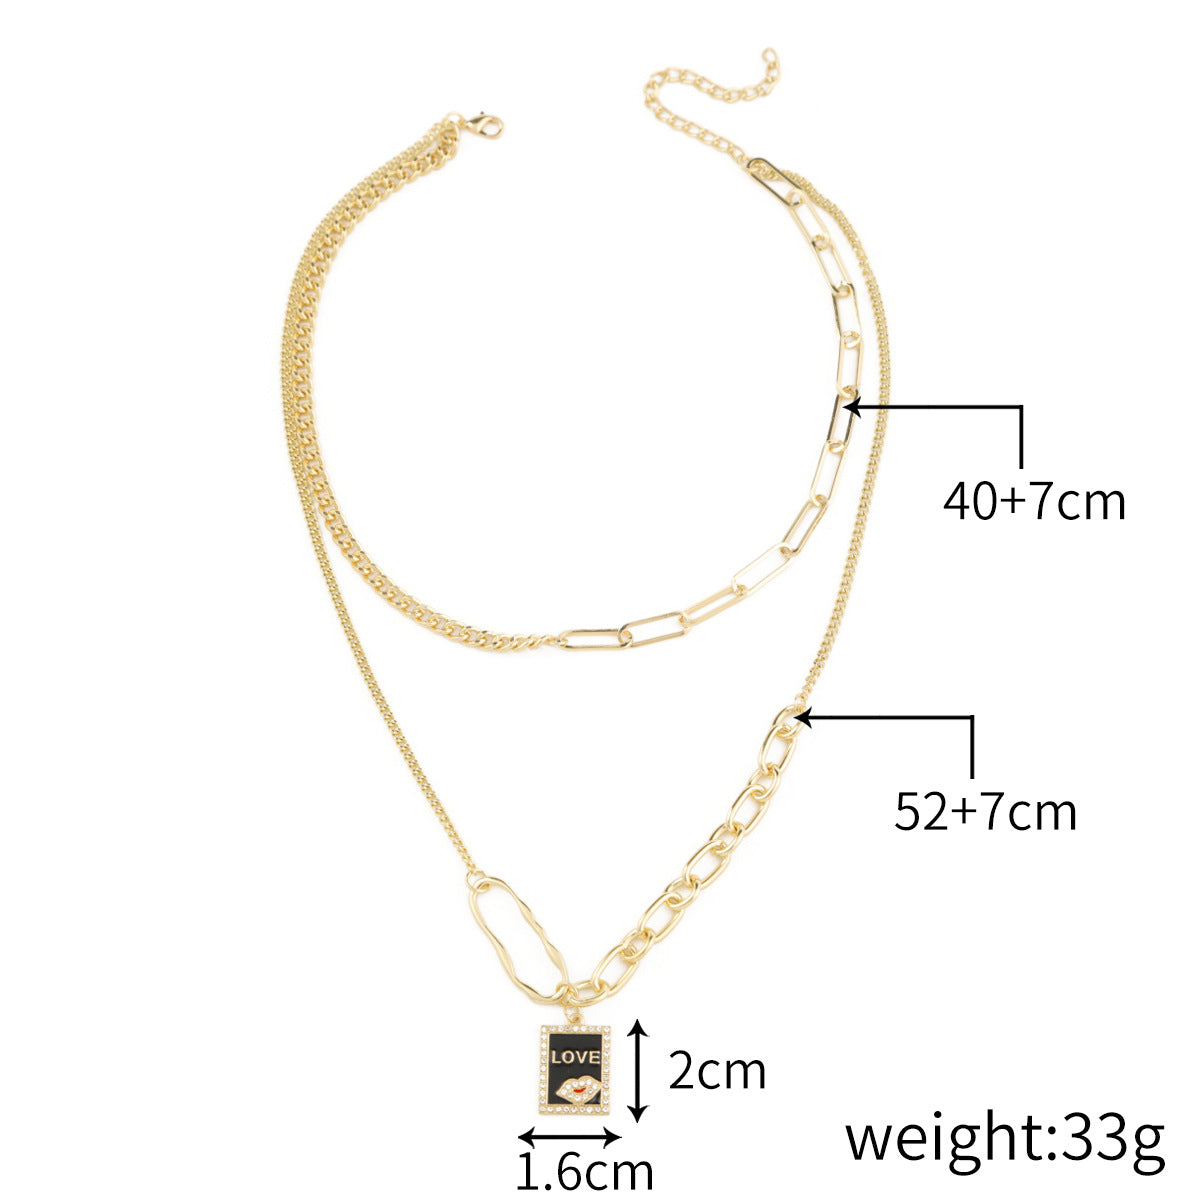 1 Piece Fashion Solid Color Alloy Chain Women's Necklace